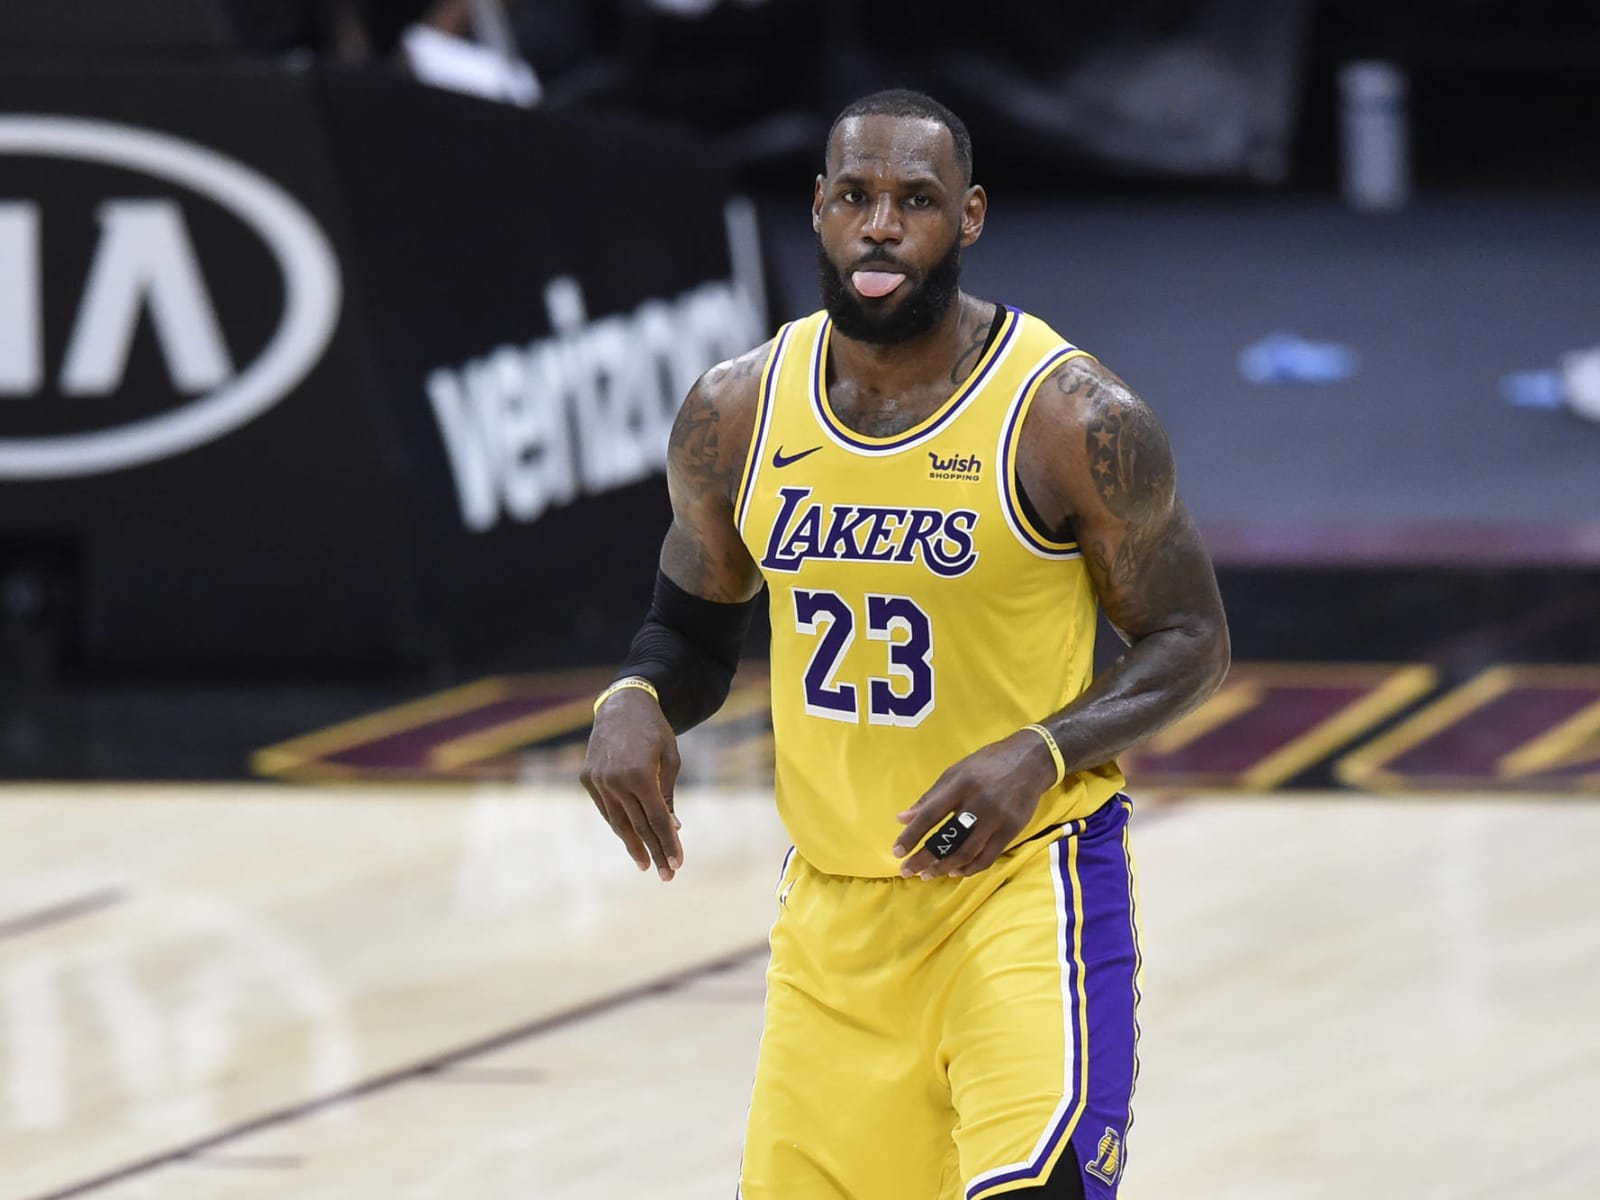 Shams Charania on X: First look: LeBron James will change his Lakers jersey  number to No. 6 next season after donning the number in his new movie  “Space Jam: A New Legacy.”